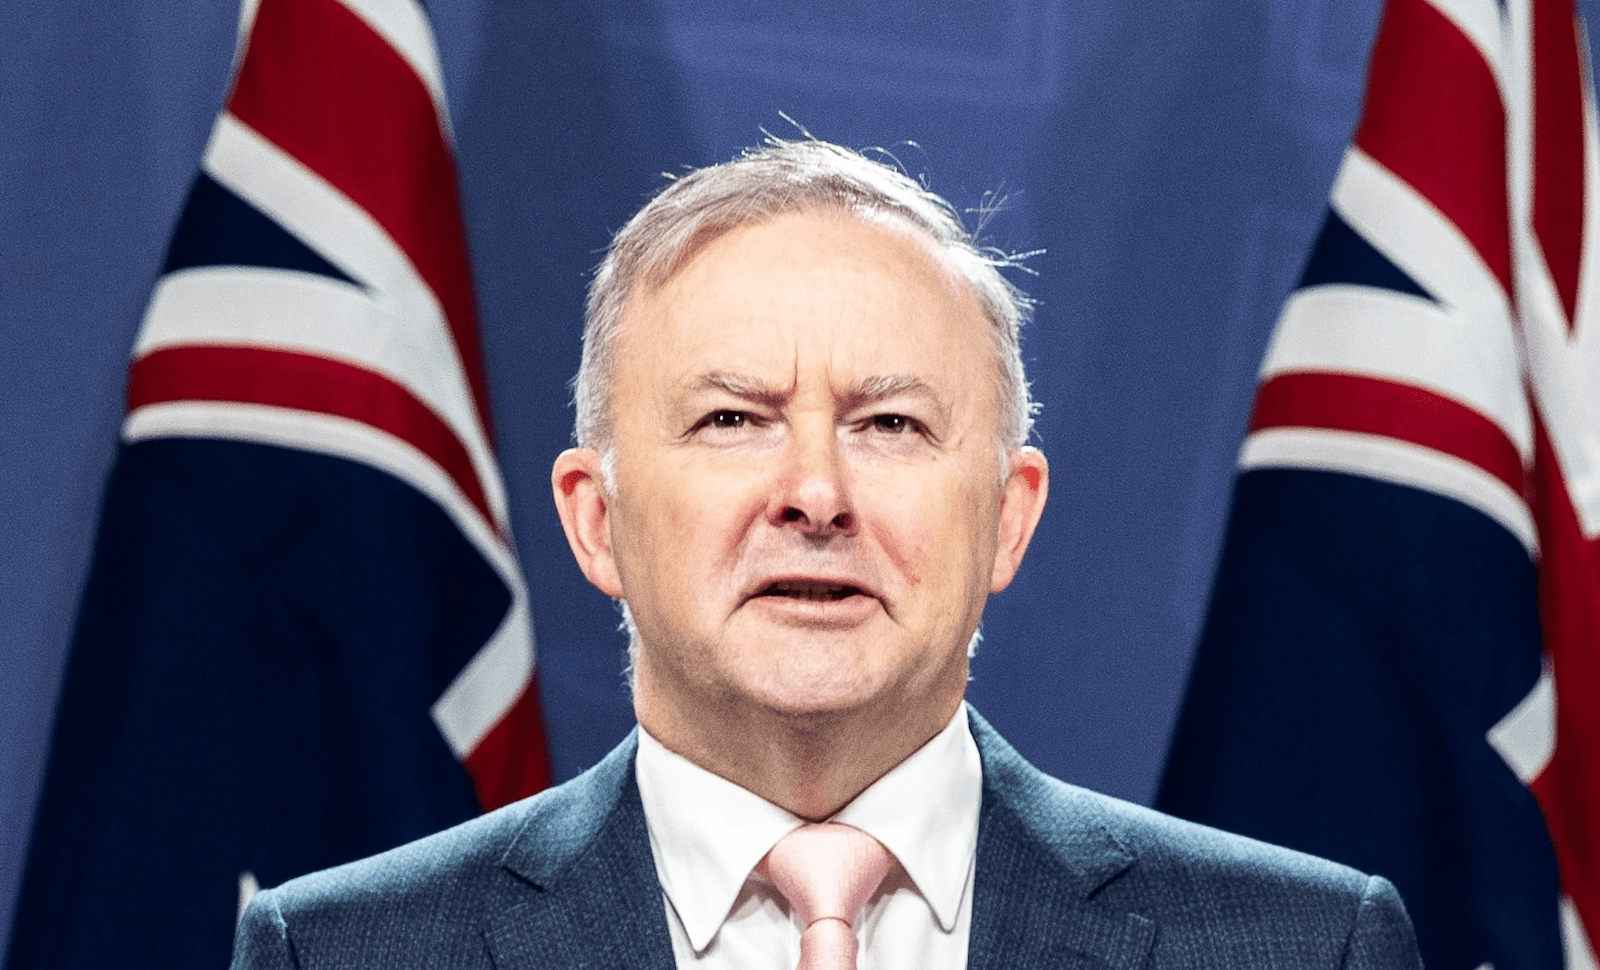 Opposition Leader Anthony Albanese's message for Orthodox Easter